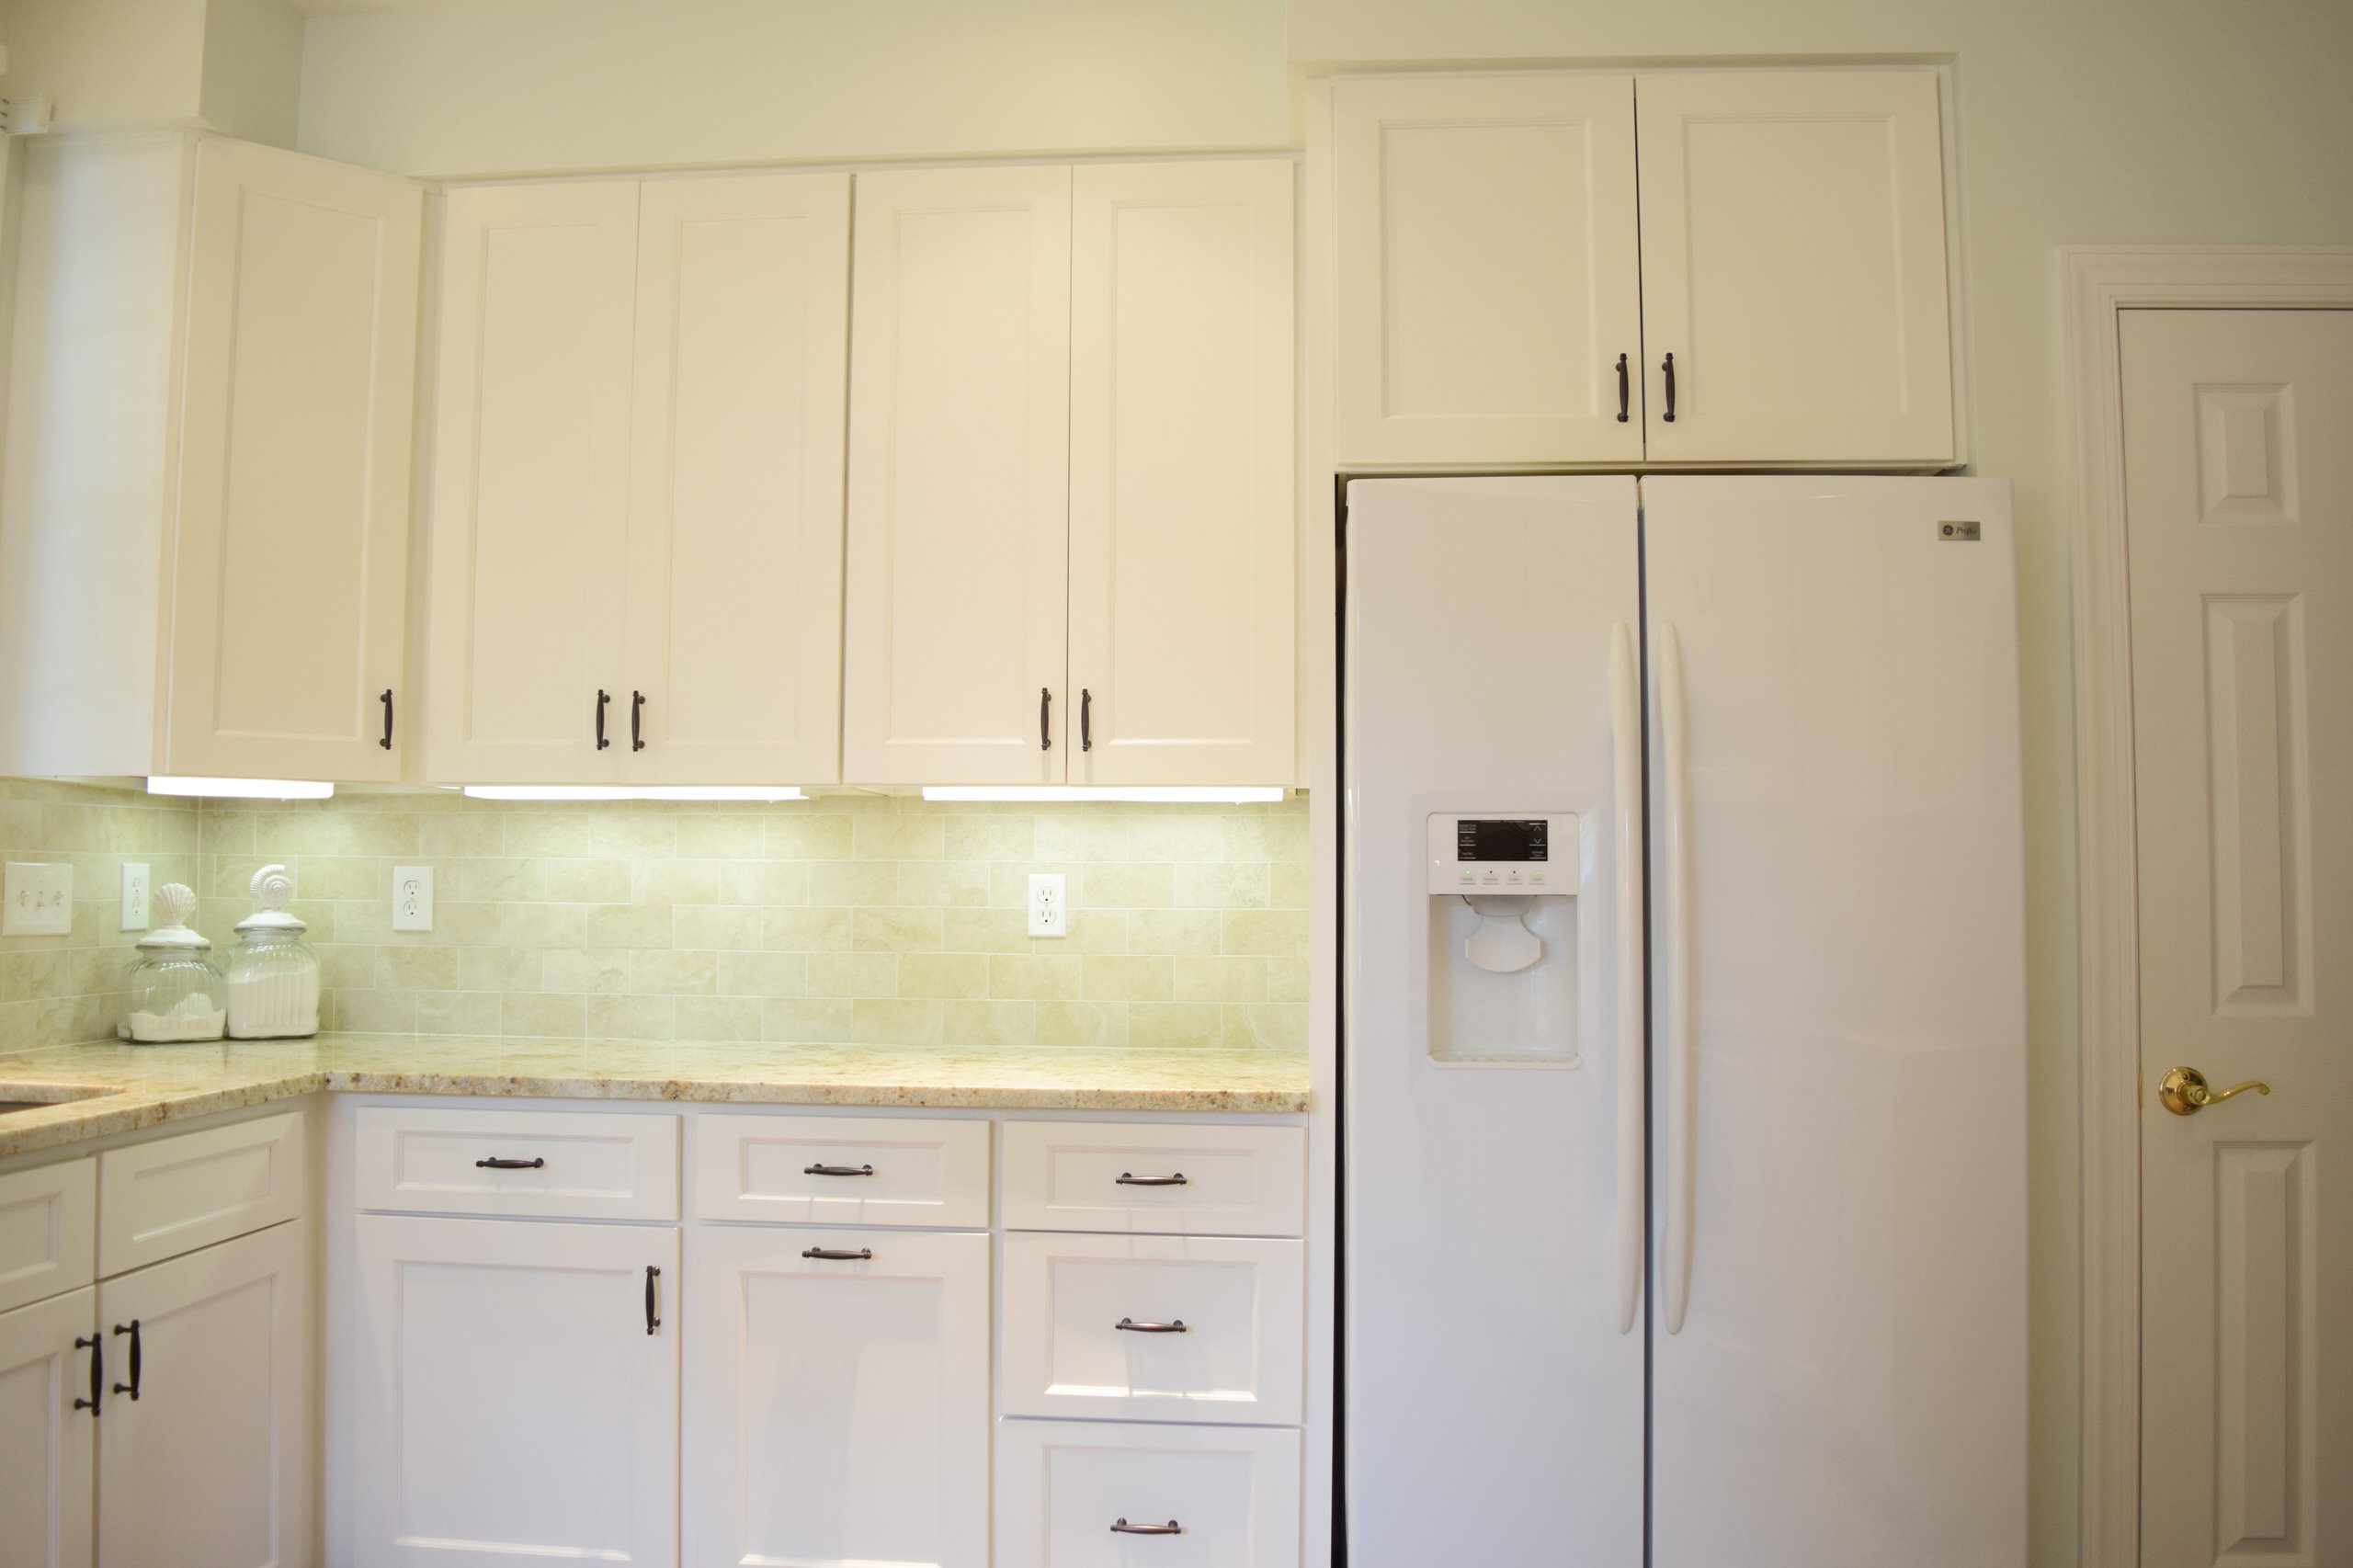 White appliances with white cabinets.